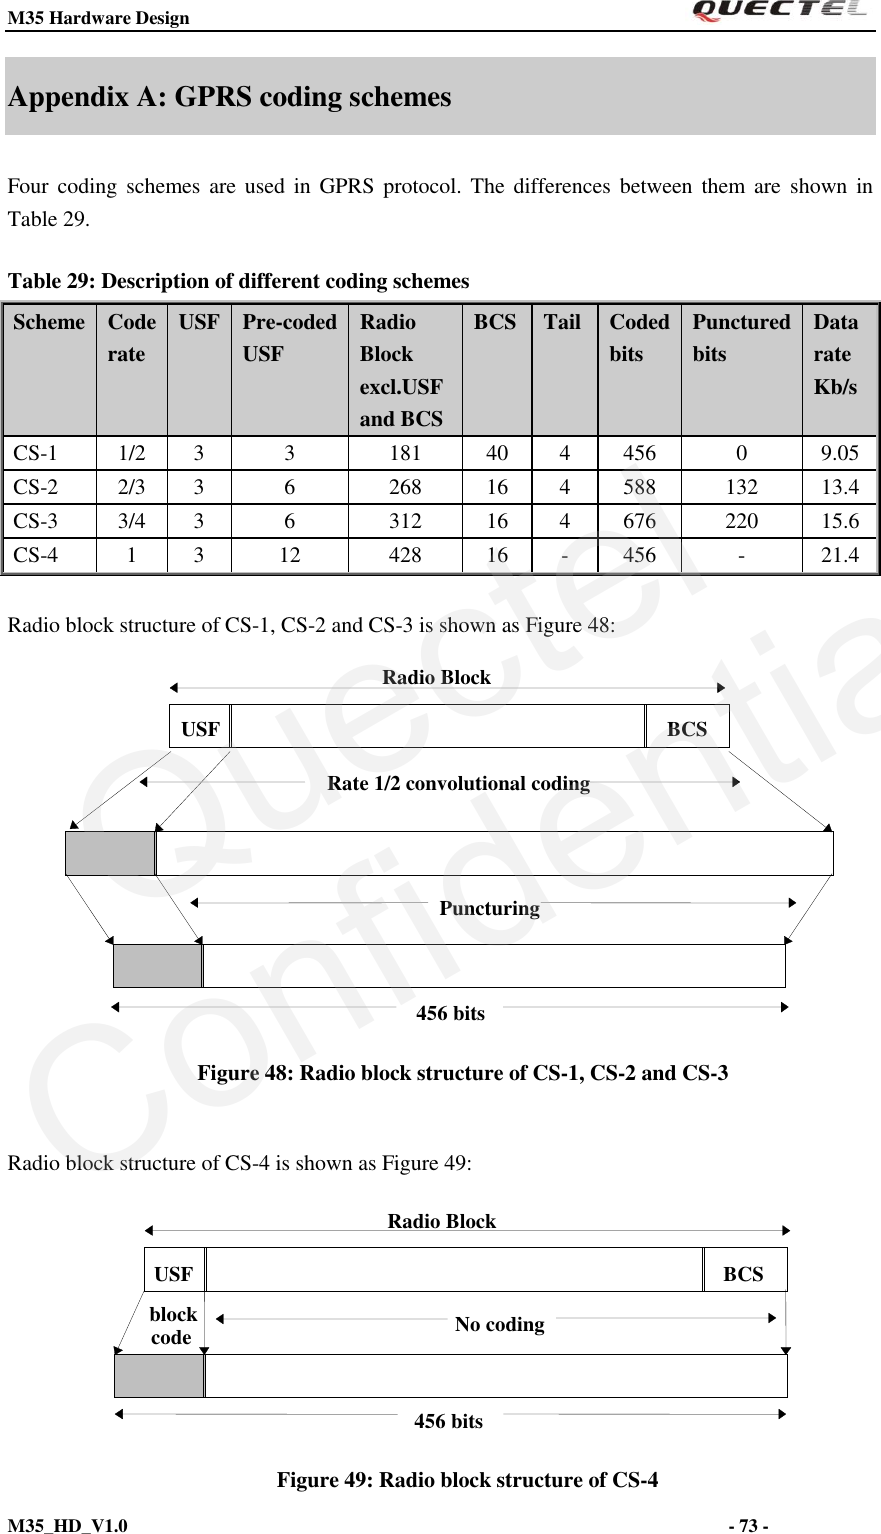 M35 Hardware Design                                                                  M35_HD_V1.0                                                                                                                         - 73 -    Appendix A: GPRS coding schemes Four  coding  schemes are  used  in  GPRS protocol. The  differences  between  them  are  shown  in Table 29. Table 29: Description of different coding schemes Scheme Code rate USF Pre-coded USF Radio Block excl.USF and BCS BCS Tail Coded bits Punctured bits Data rate Kb/s CS-1 1/2 3 3 181 40 4 456 0 9.05 CS-2 2/3 3 6 268 16 4 588 132 13.4 CS-3 3/4 3 6 312 16 4 676 220 15.6 CS-4 1 3 12 428 16 - 456 - 21.4  Radio block structure of CS-1, CS-2 and CS-3 is shown as Figure 48:                  Figure 48: Radio block structure of CS-1, CS-2 and CS-3  Radio block structure of CS-4 is shown as Figure 49:                  Figure 49: Radio block structure of CS-4 Rate 1/2 convolutional coding Puncturing 456 bits USF BCS Radio Block block code No coding USF BCS Radio Block 456 bits QuectelConfidential